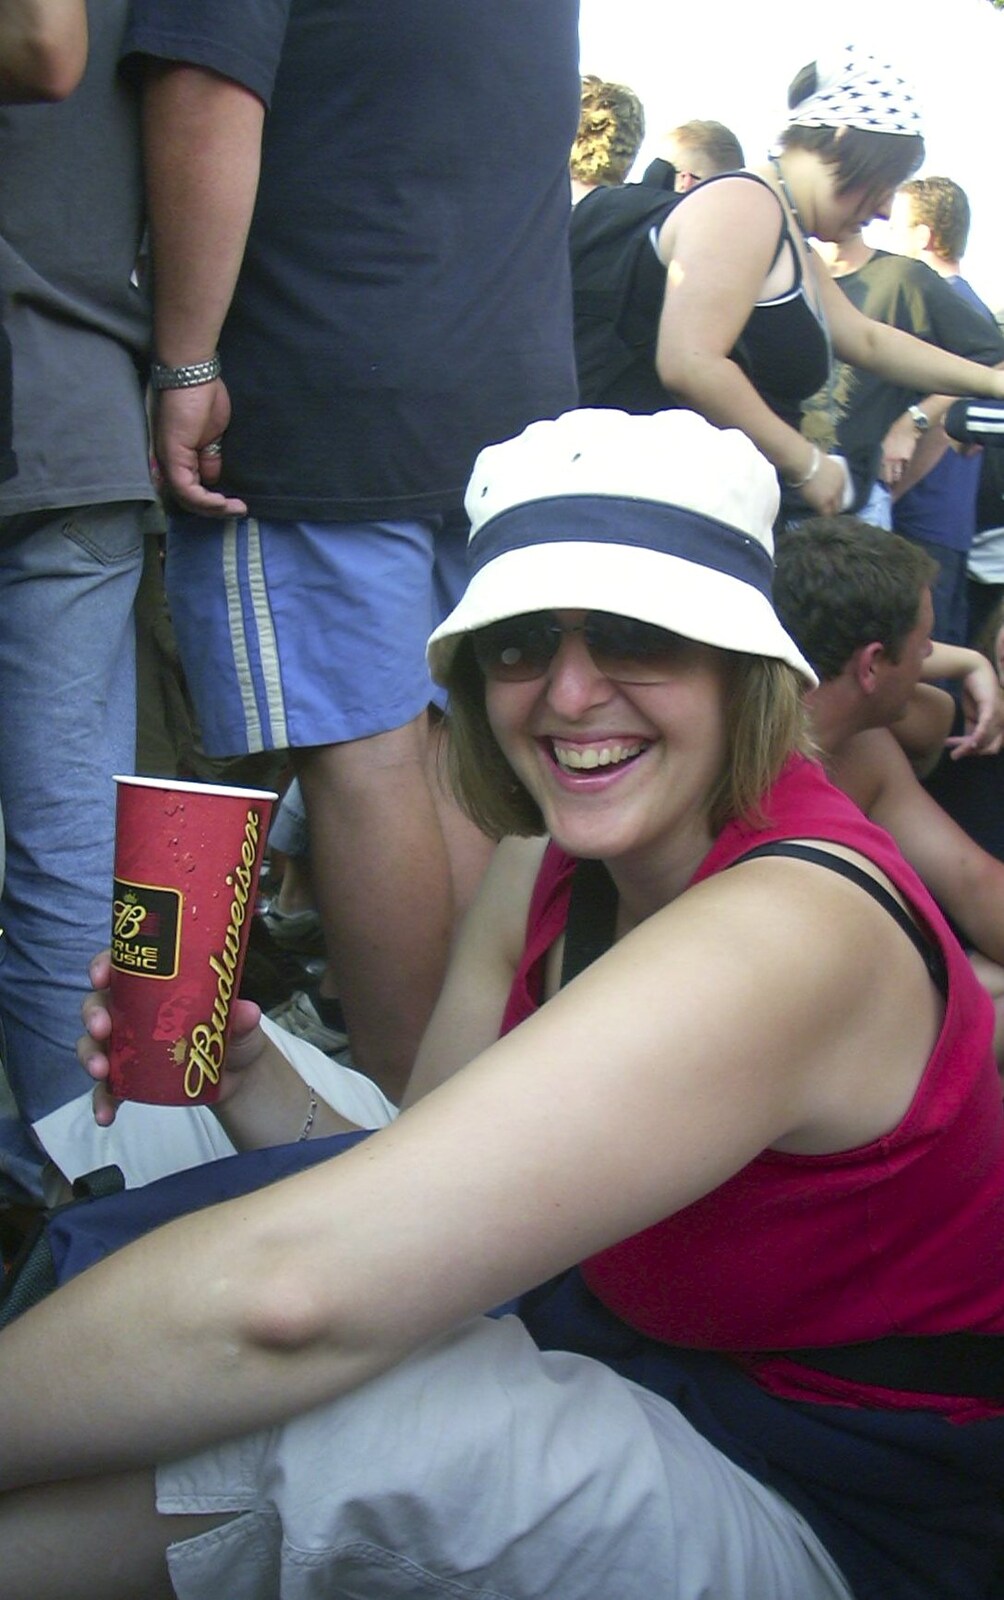 Sarah sits down in a crowd from V Festival 2003, Hyland's Park, Chelmsford, Essex - 16th August 2003